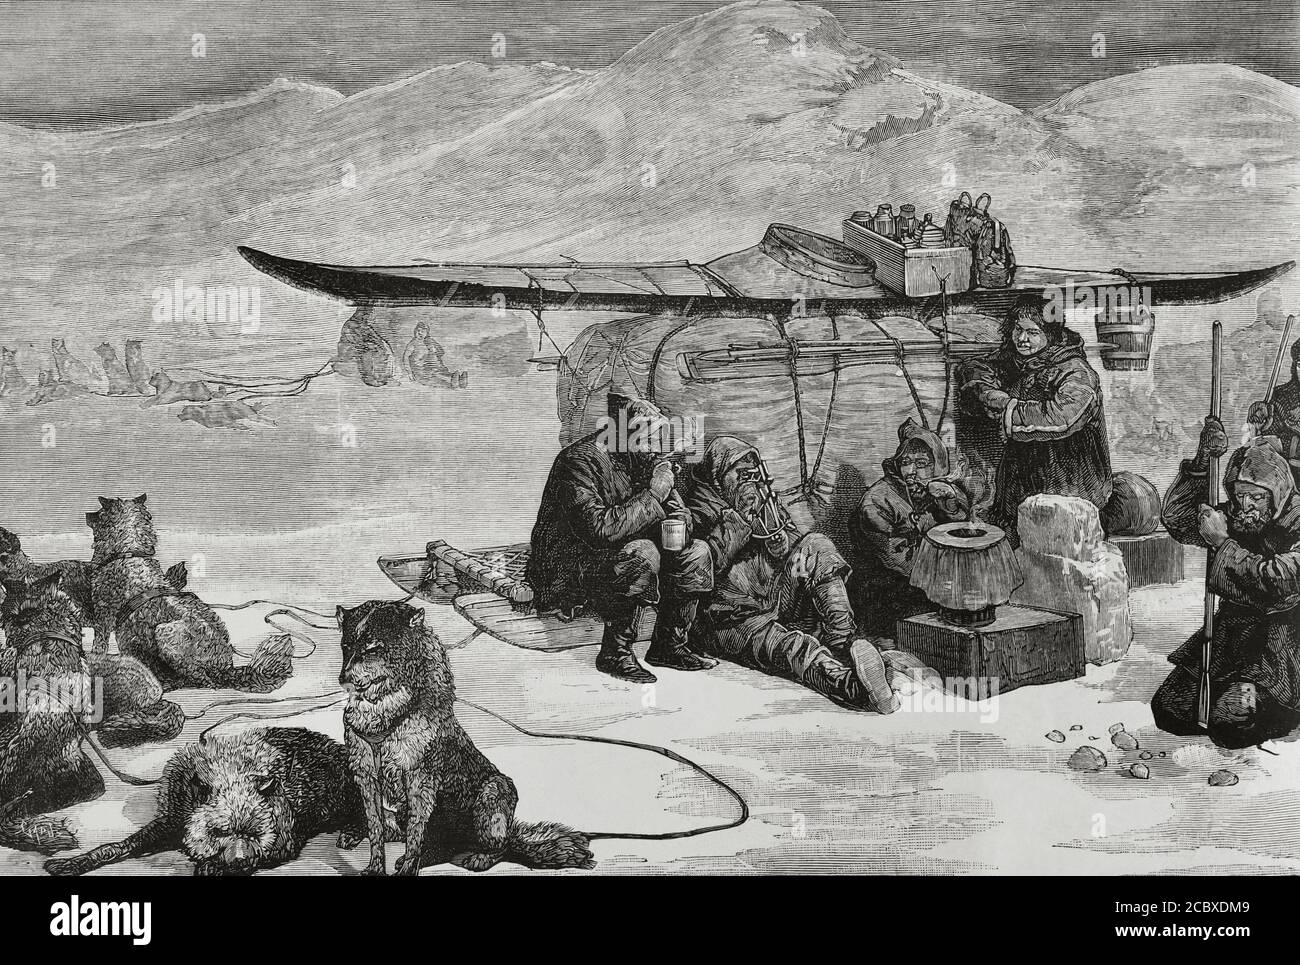 Captain Sir John Franklin's lost expedition to the Canadian Arctic, that departed from England in 1845, tragically ended with the death of all 129 crew members. The Admiralty launched a search for the lost expedition in 1848. Expedition in search of Franklin's remains. Expeditioners rest at the foot of Divide Mountain. Engraving. La Ilustracion Española y Americana, 1881. Stock Photo